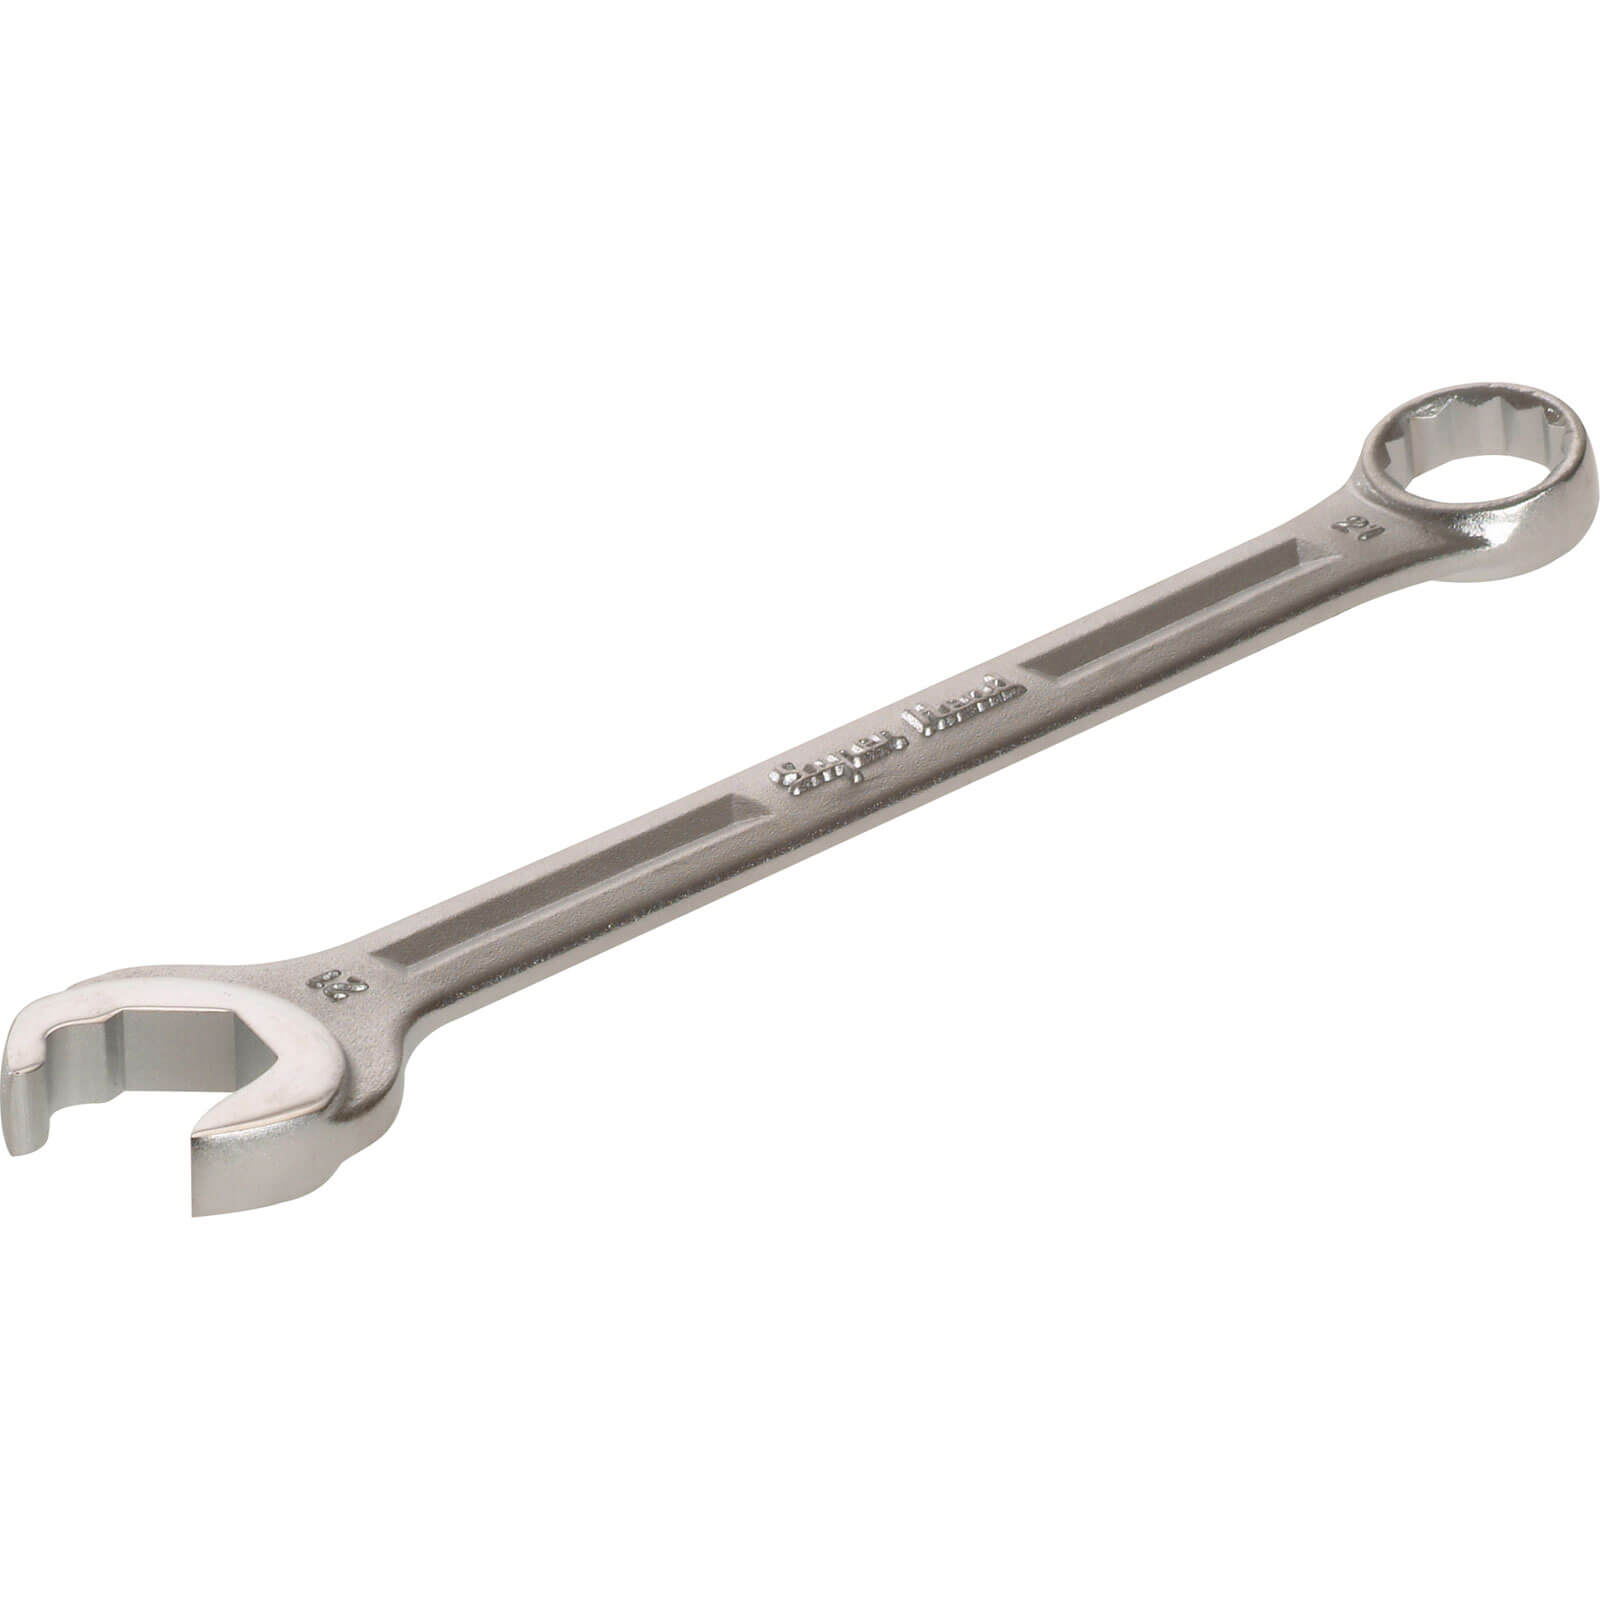 Image of Priory 615 Super Head Fast Combination Scaffold Spanner 21mm